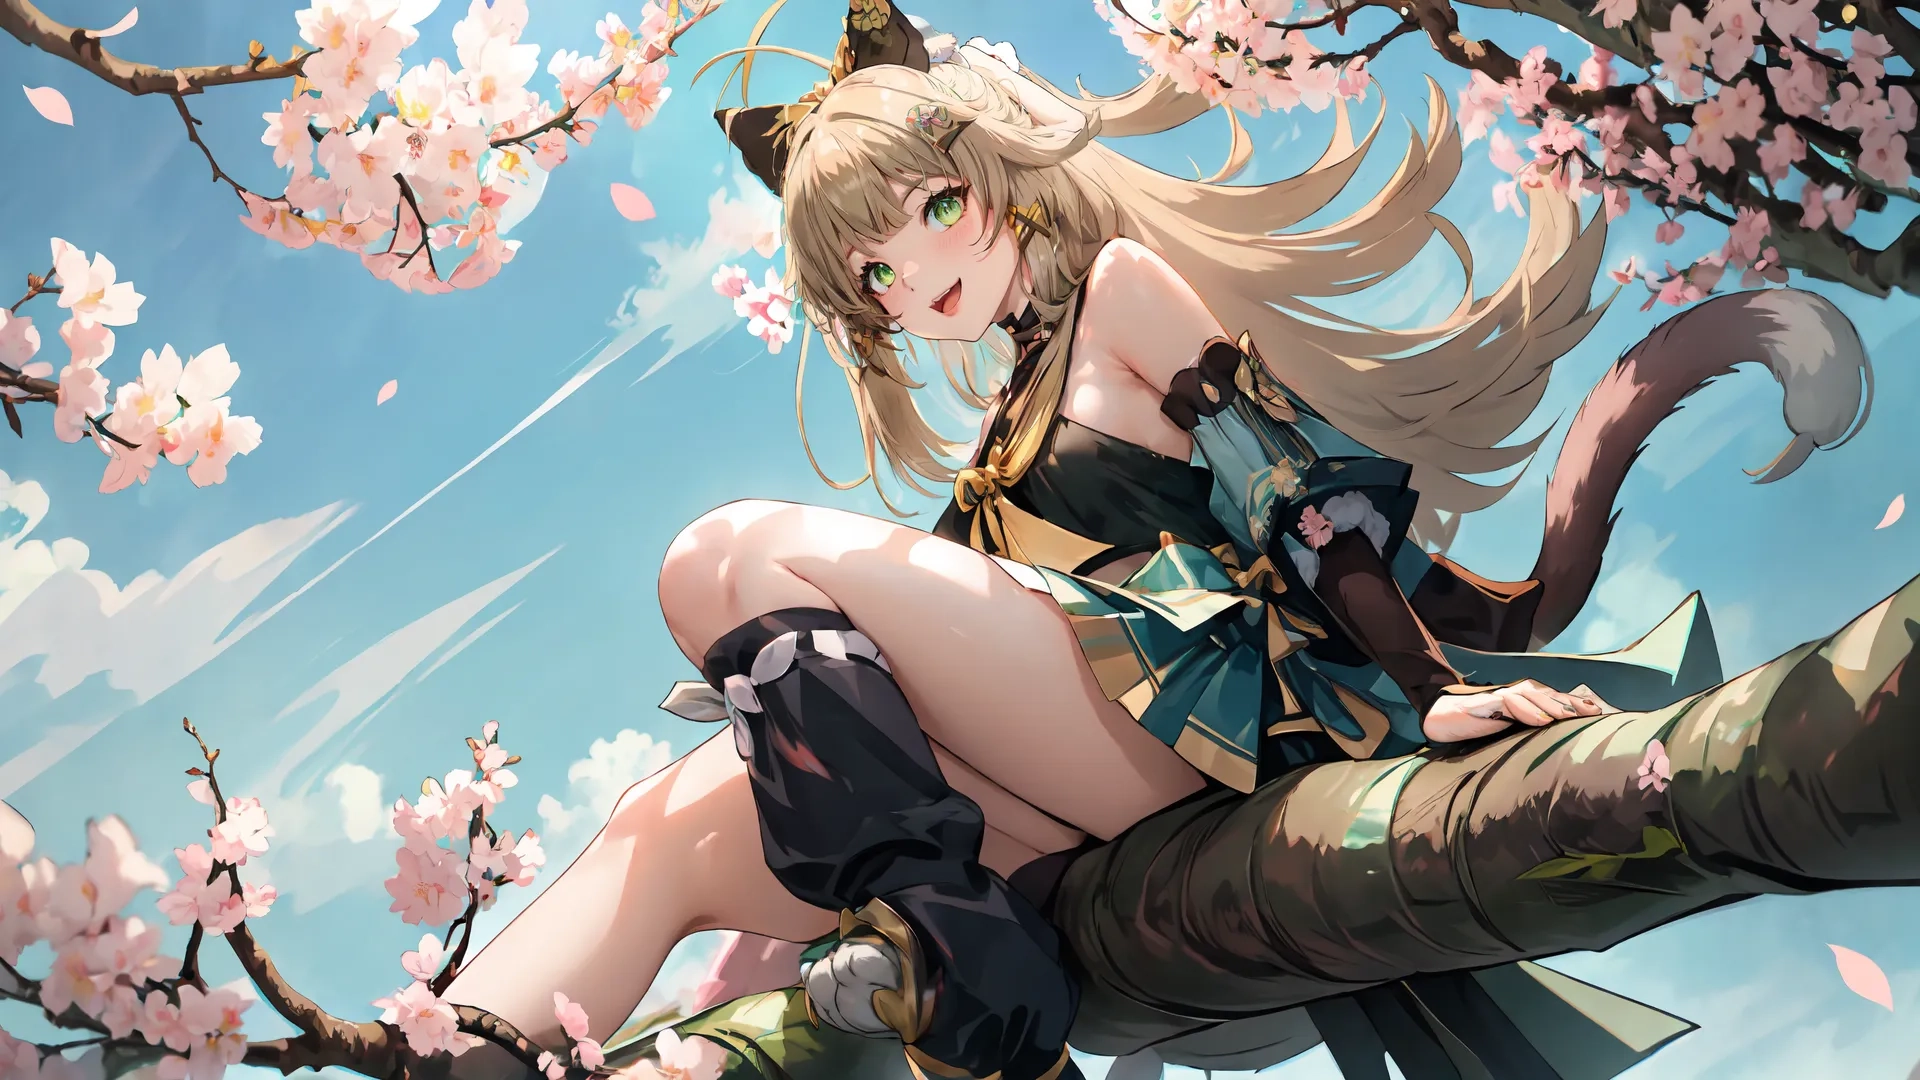 an anime anime girl on a tree in her dress and headbands, sitting over blossoms in mid - day full bloom, with blue sky and sunny background
